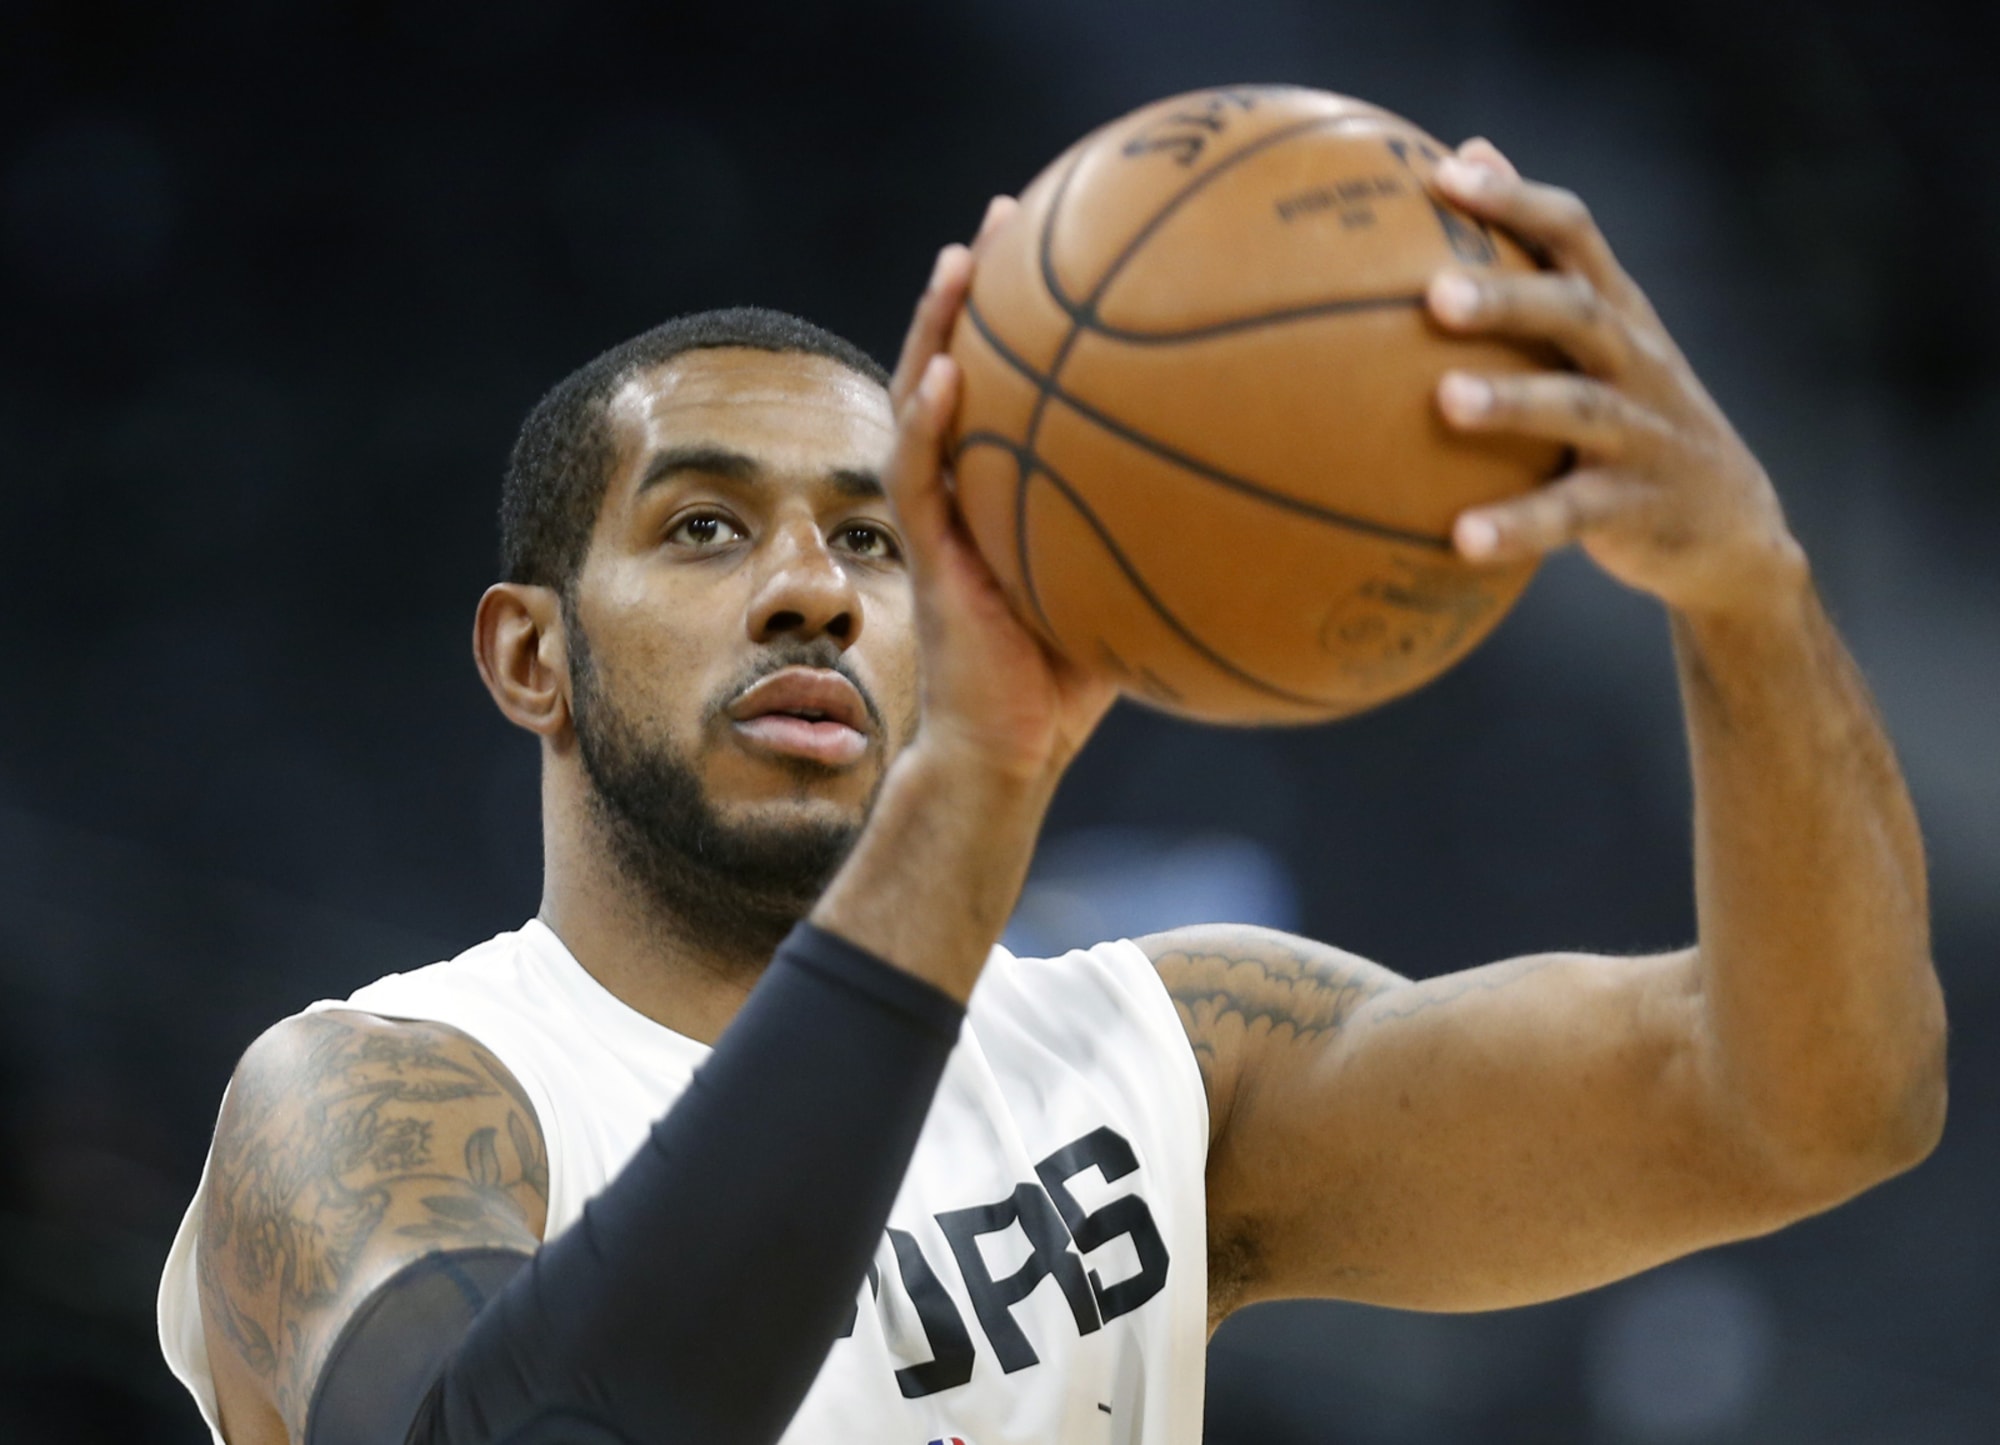 Aldridge introduced as a member of the Spurs